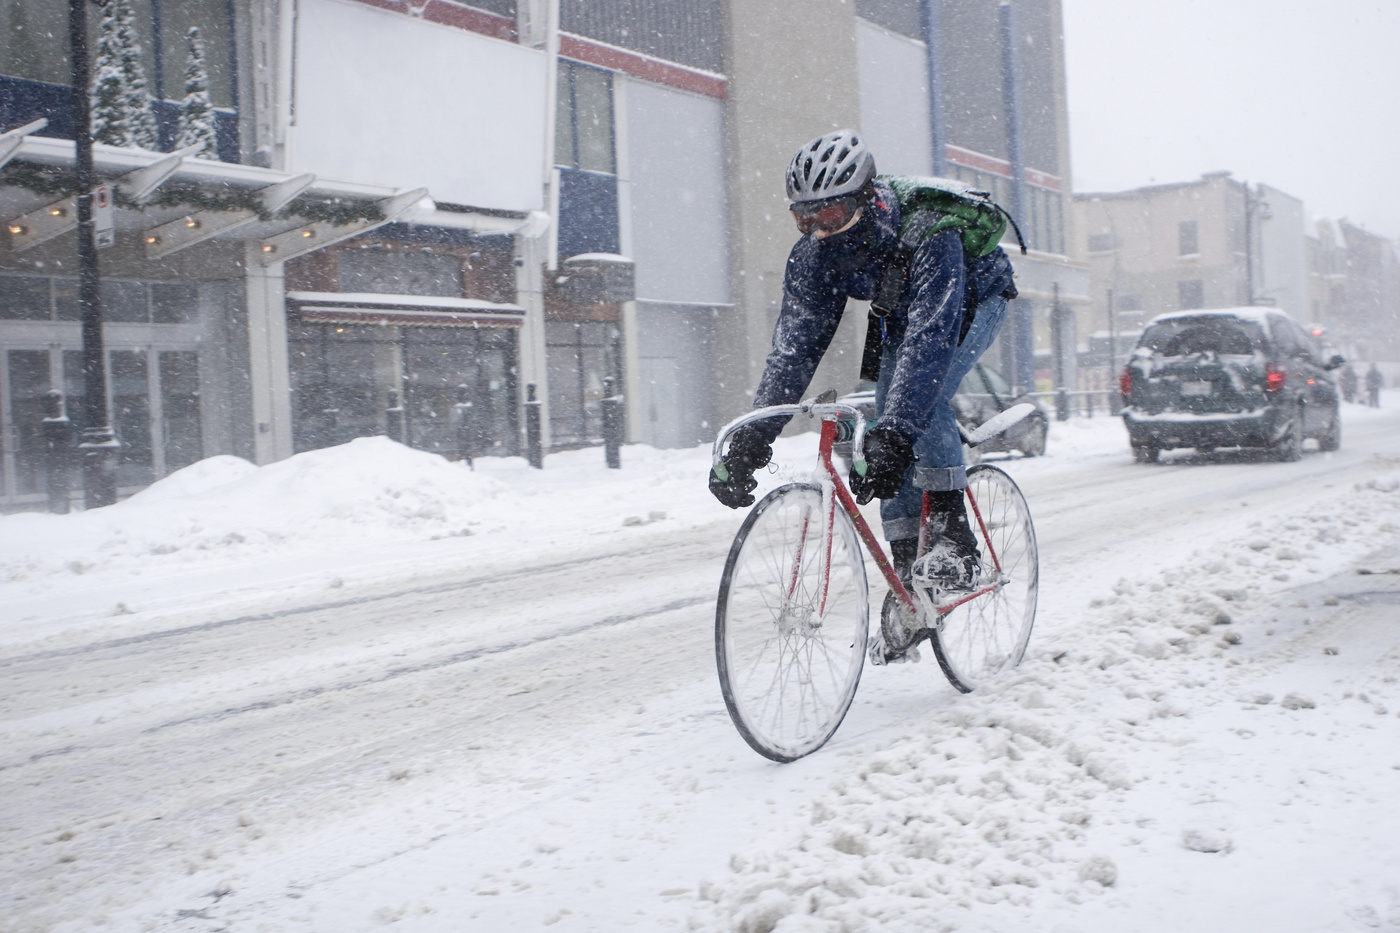 Manhattan Bicycle injury lawyer Glenn Herman Discusses Legal Issues Surrounding Winter Cycling Crashes in New York City